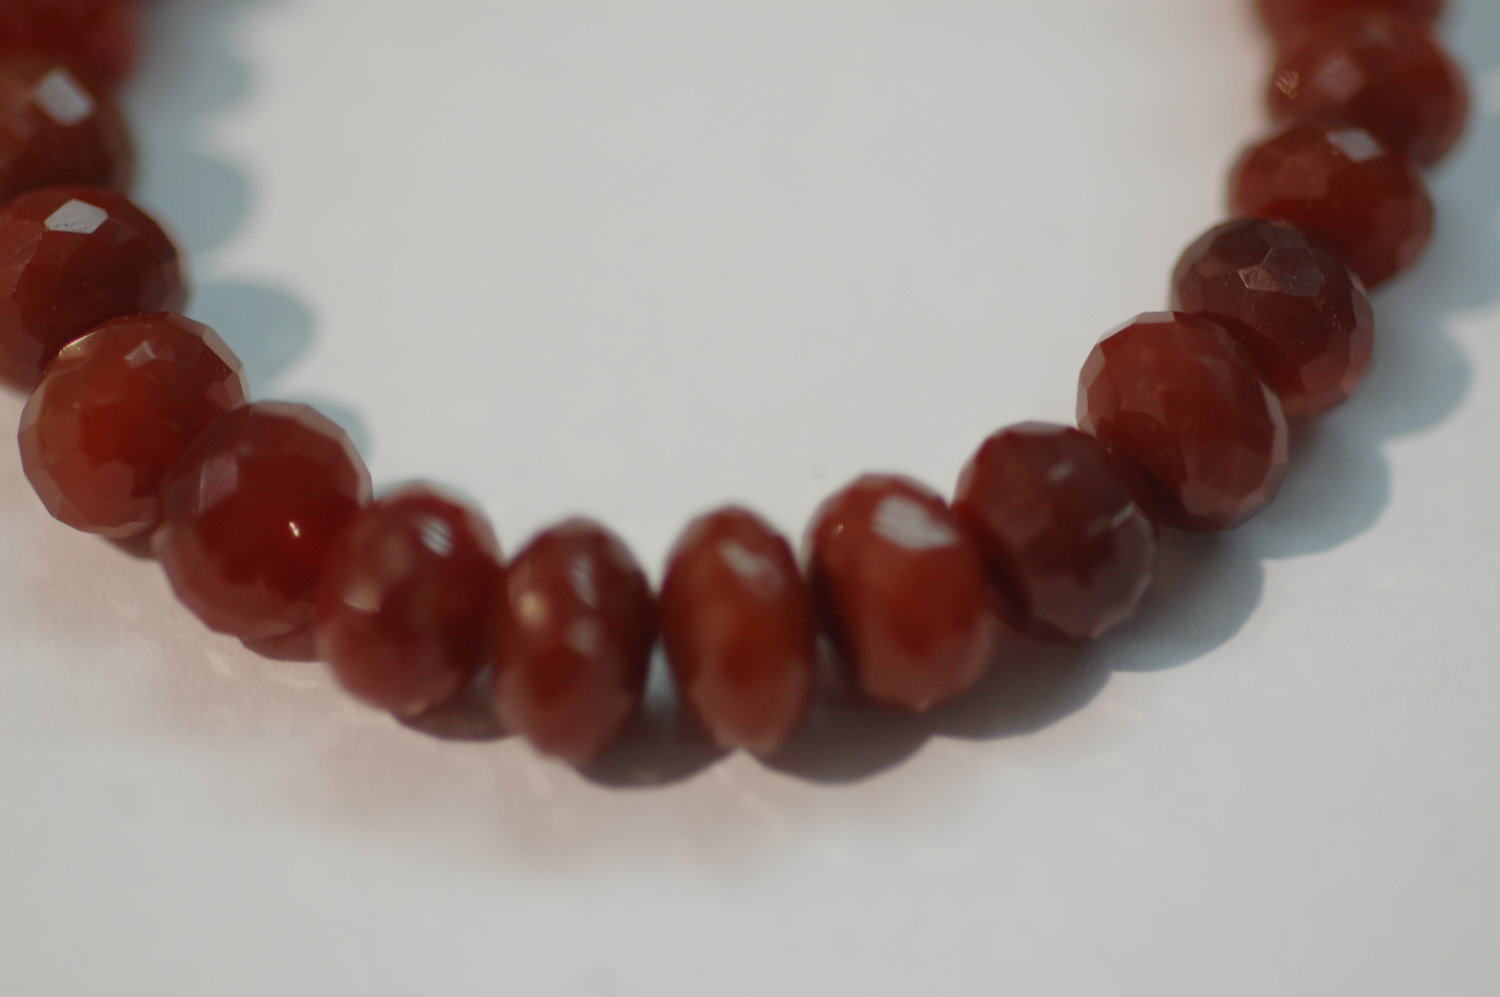 Brown Chalcedony Rondelle Faceted